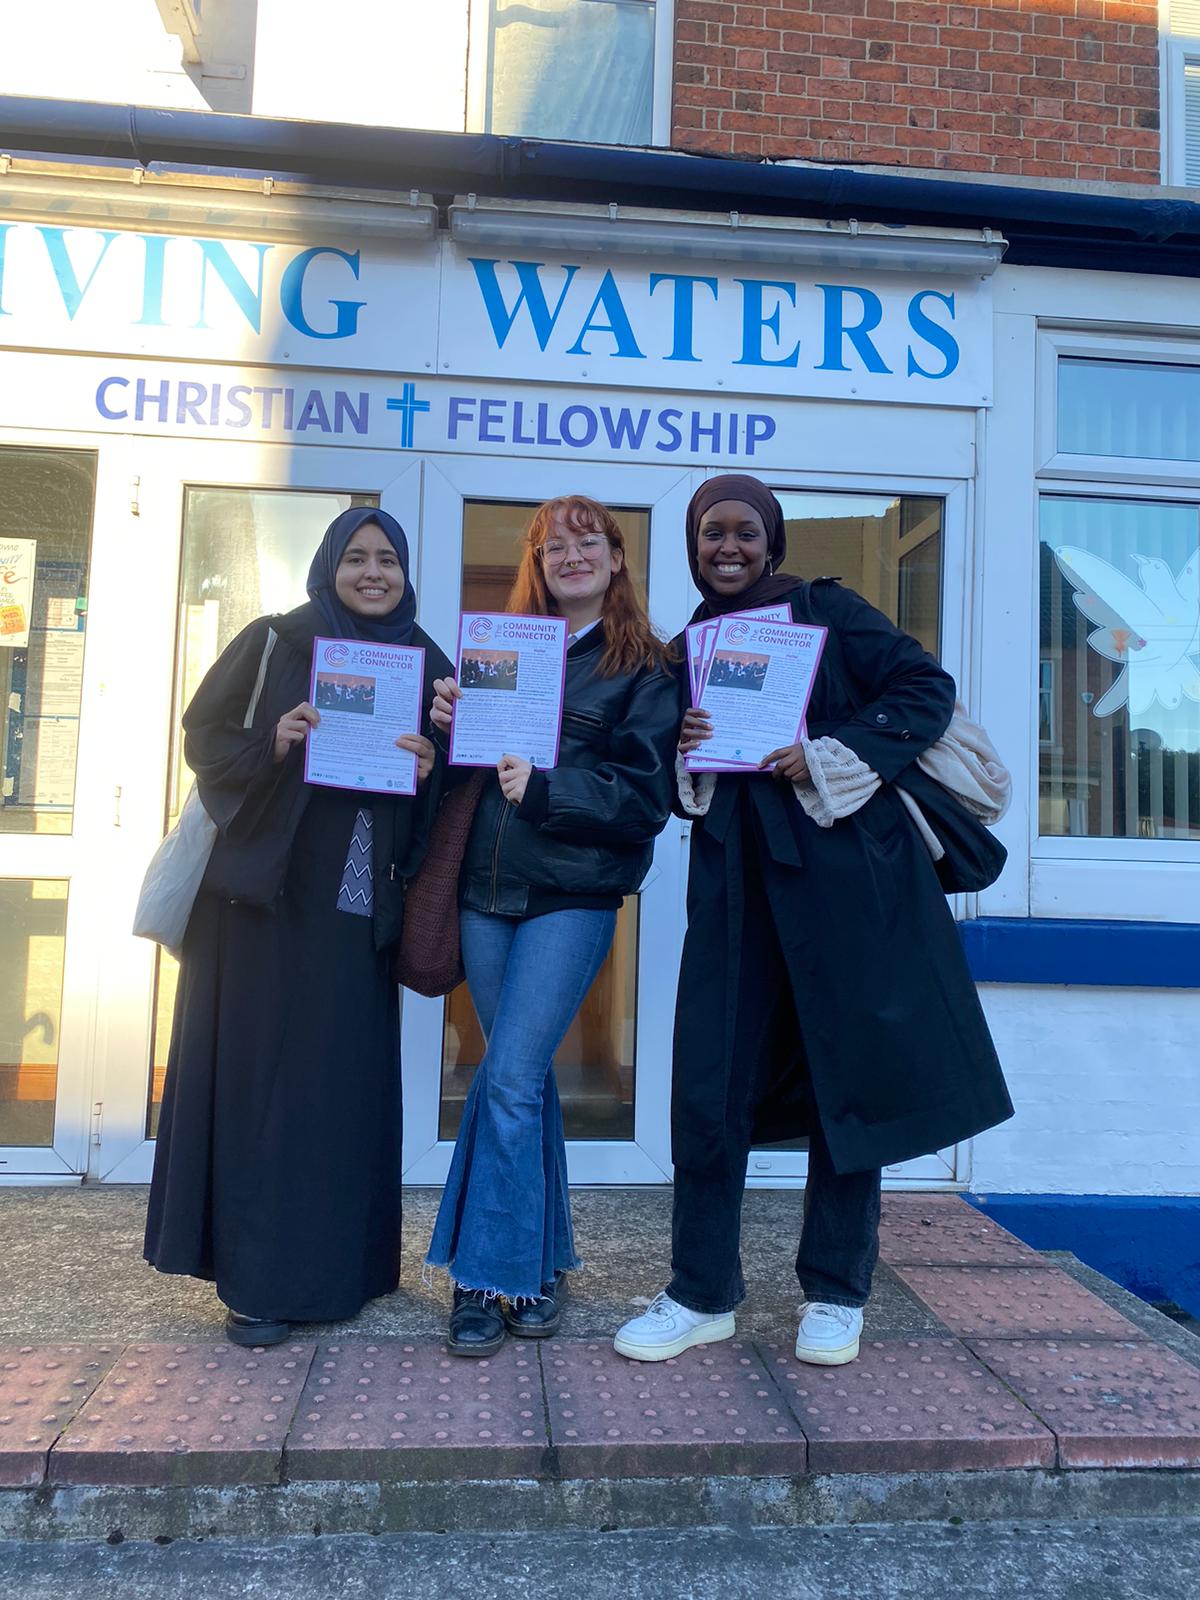 3 women standing outside a building, smiling to camera and holding up community newsletters